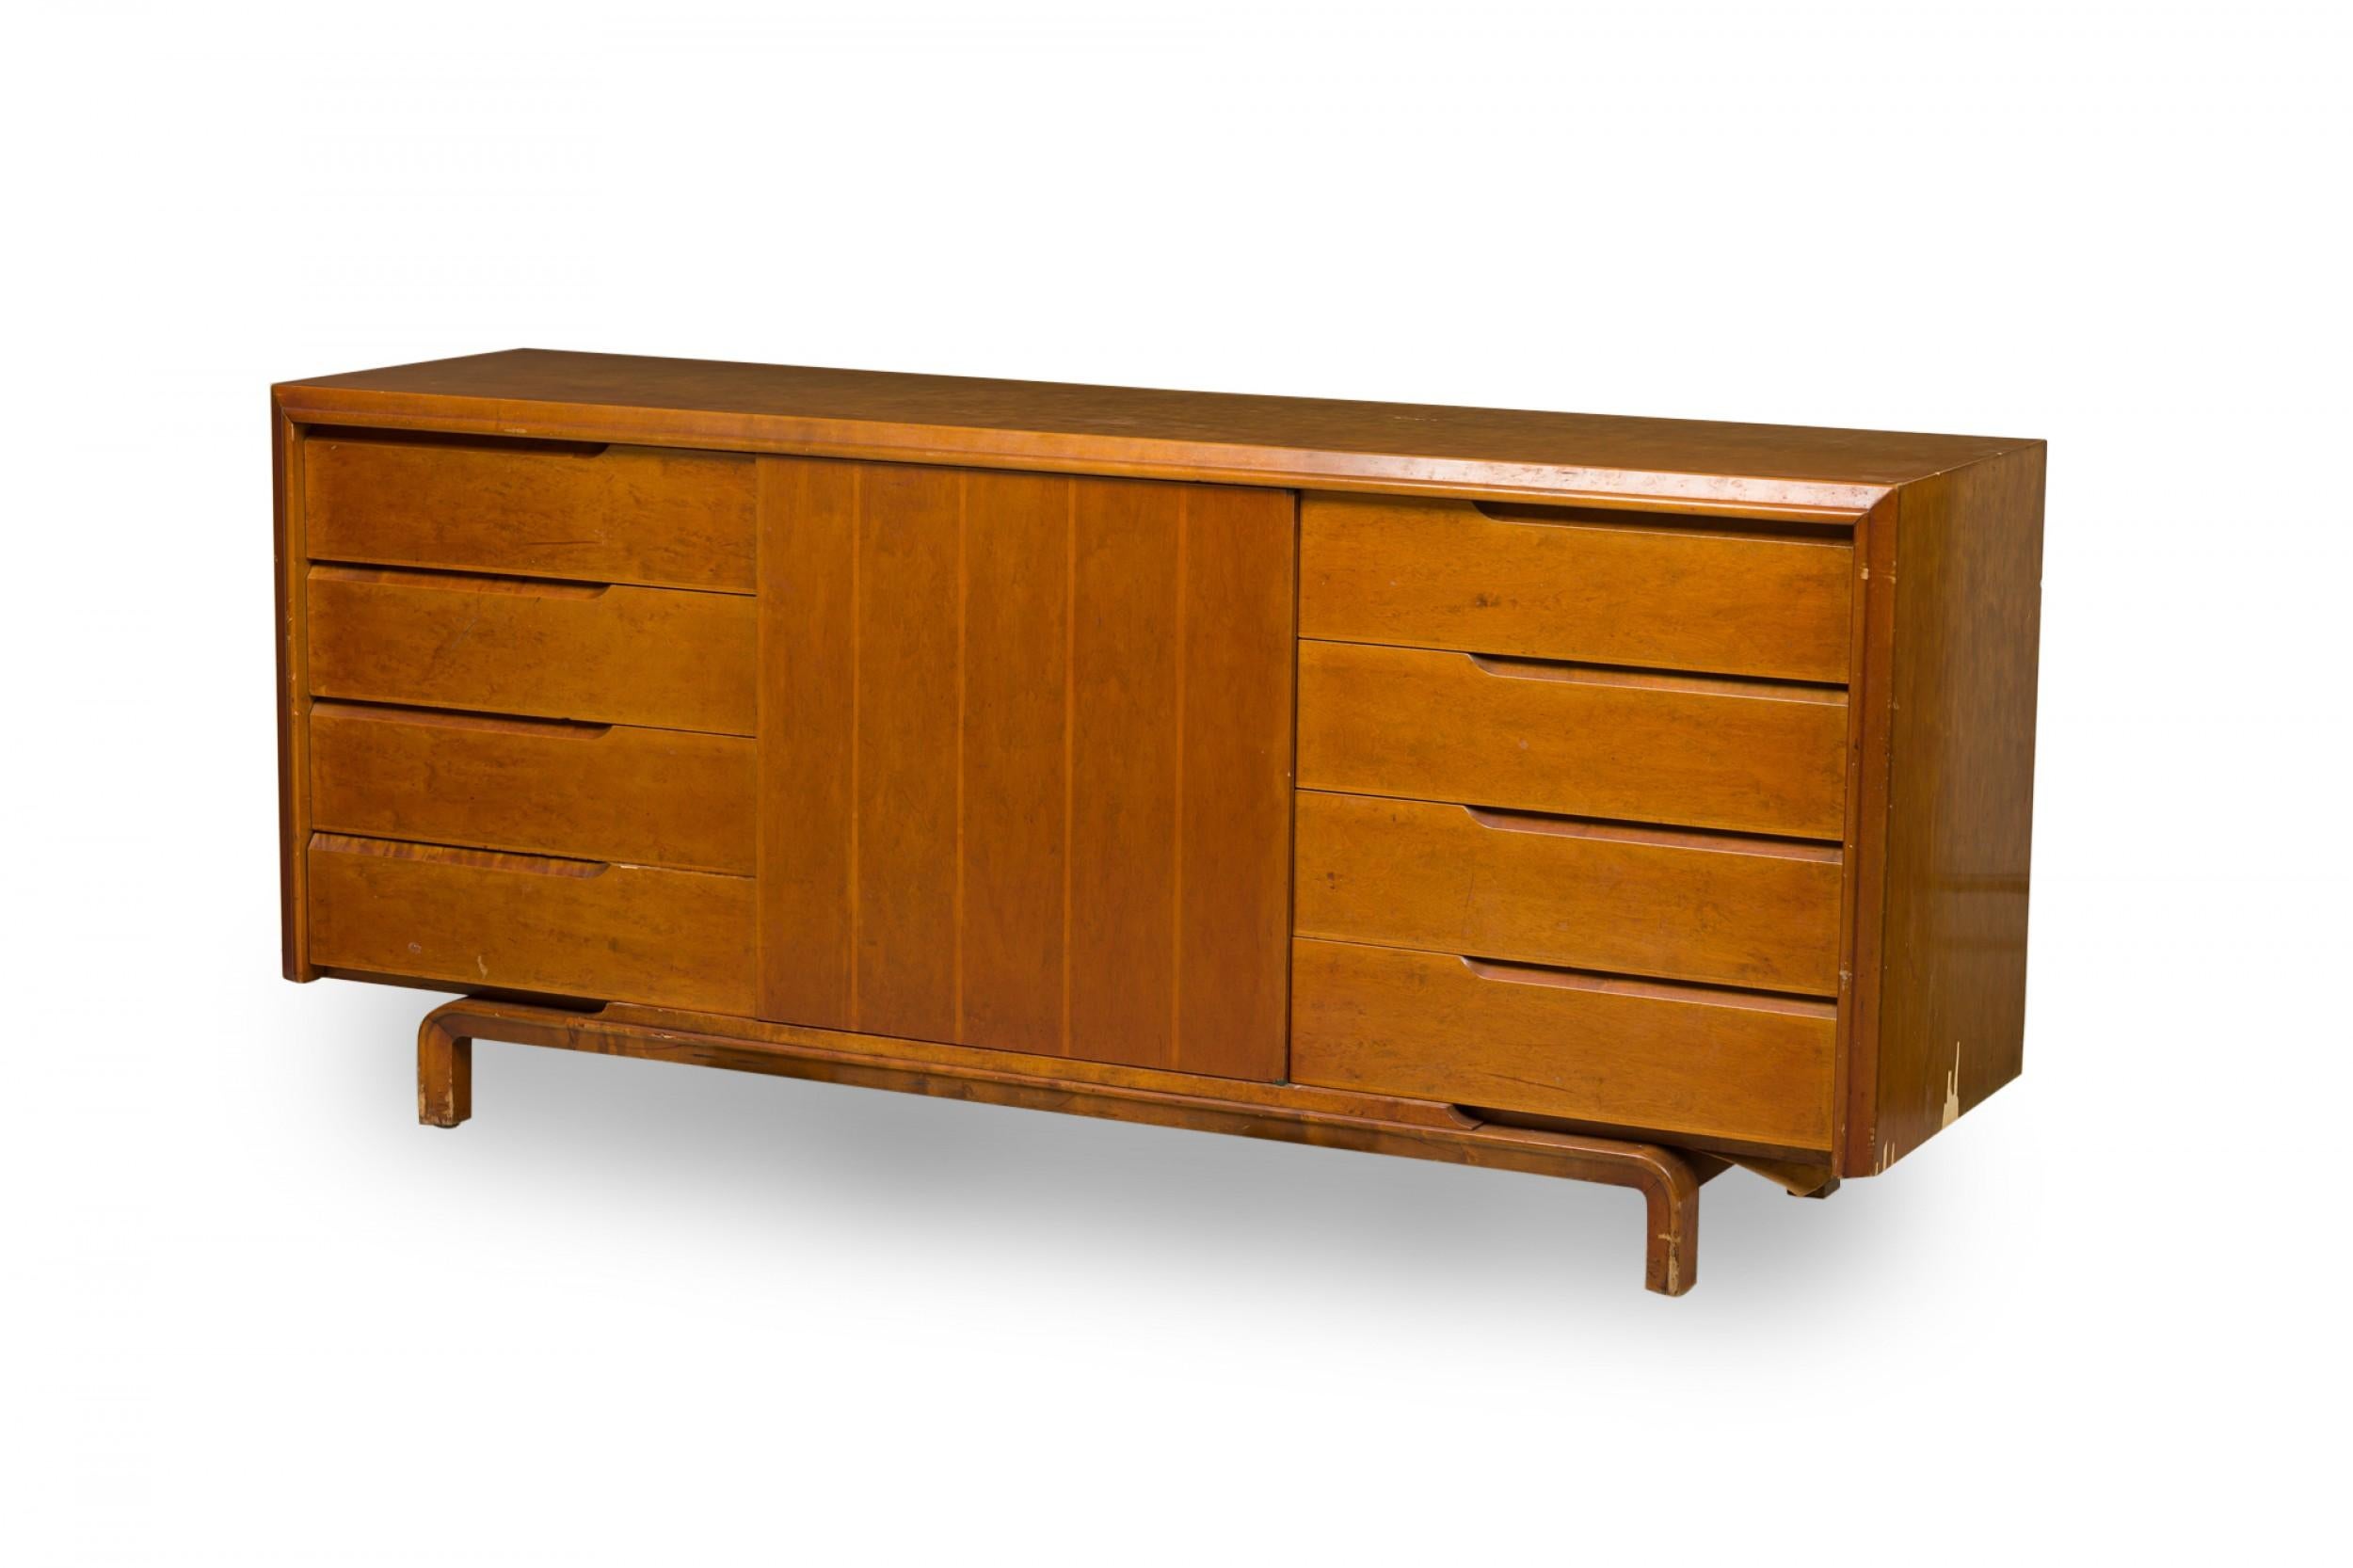 Finnish Mid-Century Modern birch and maple veneer sideboard / dresser with a central cabinet with a door subtly decorated with vertical striped inlay which opens to reveal a two compartment and single drawer interior, flanked on either side by a set